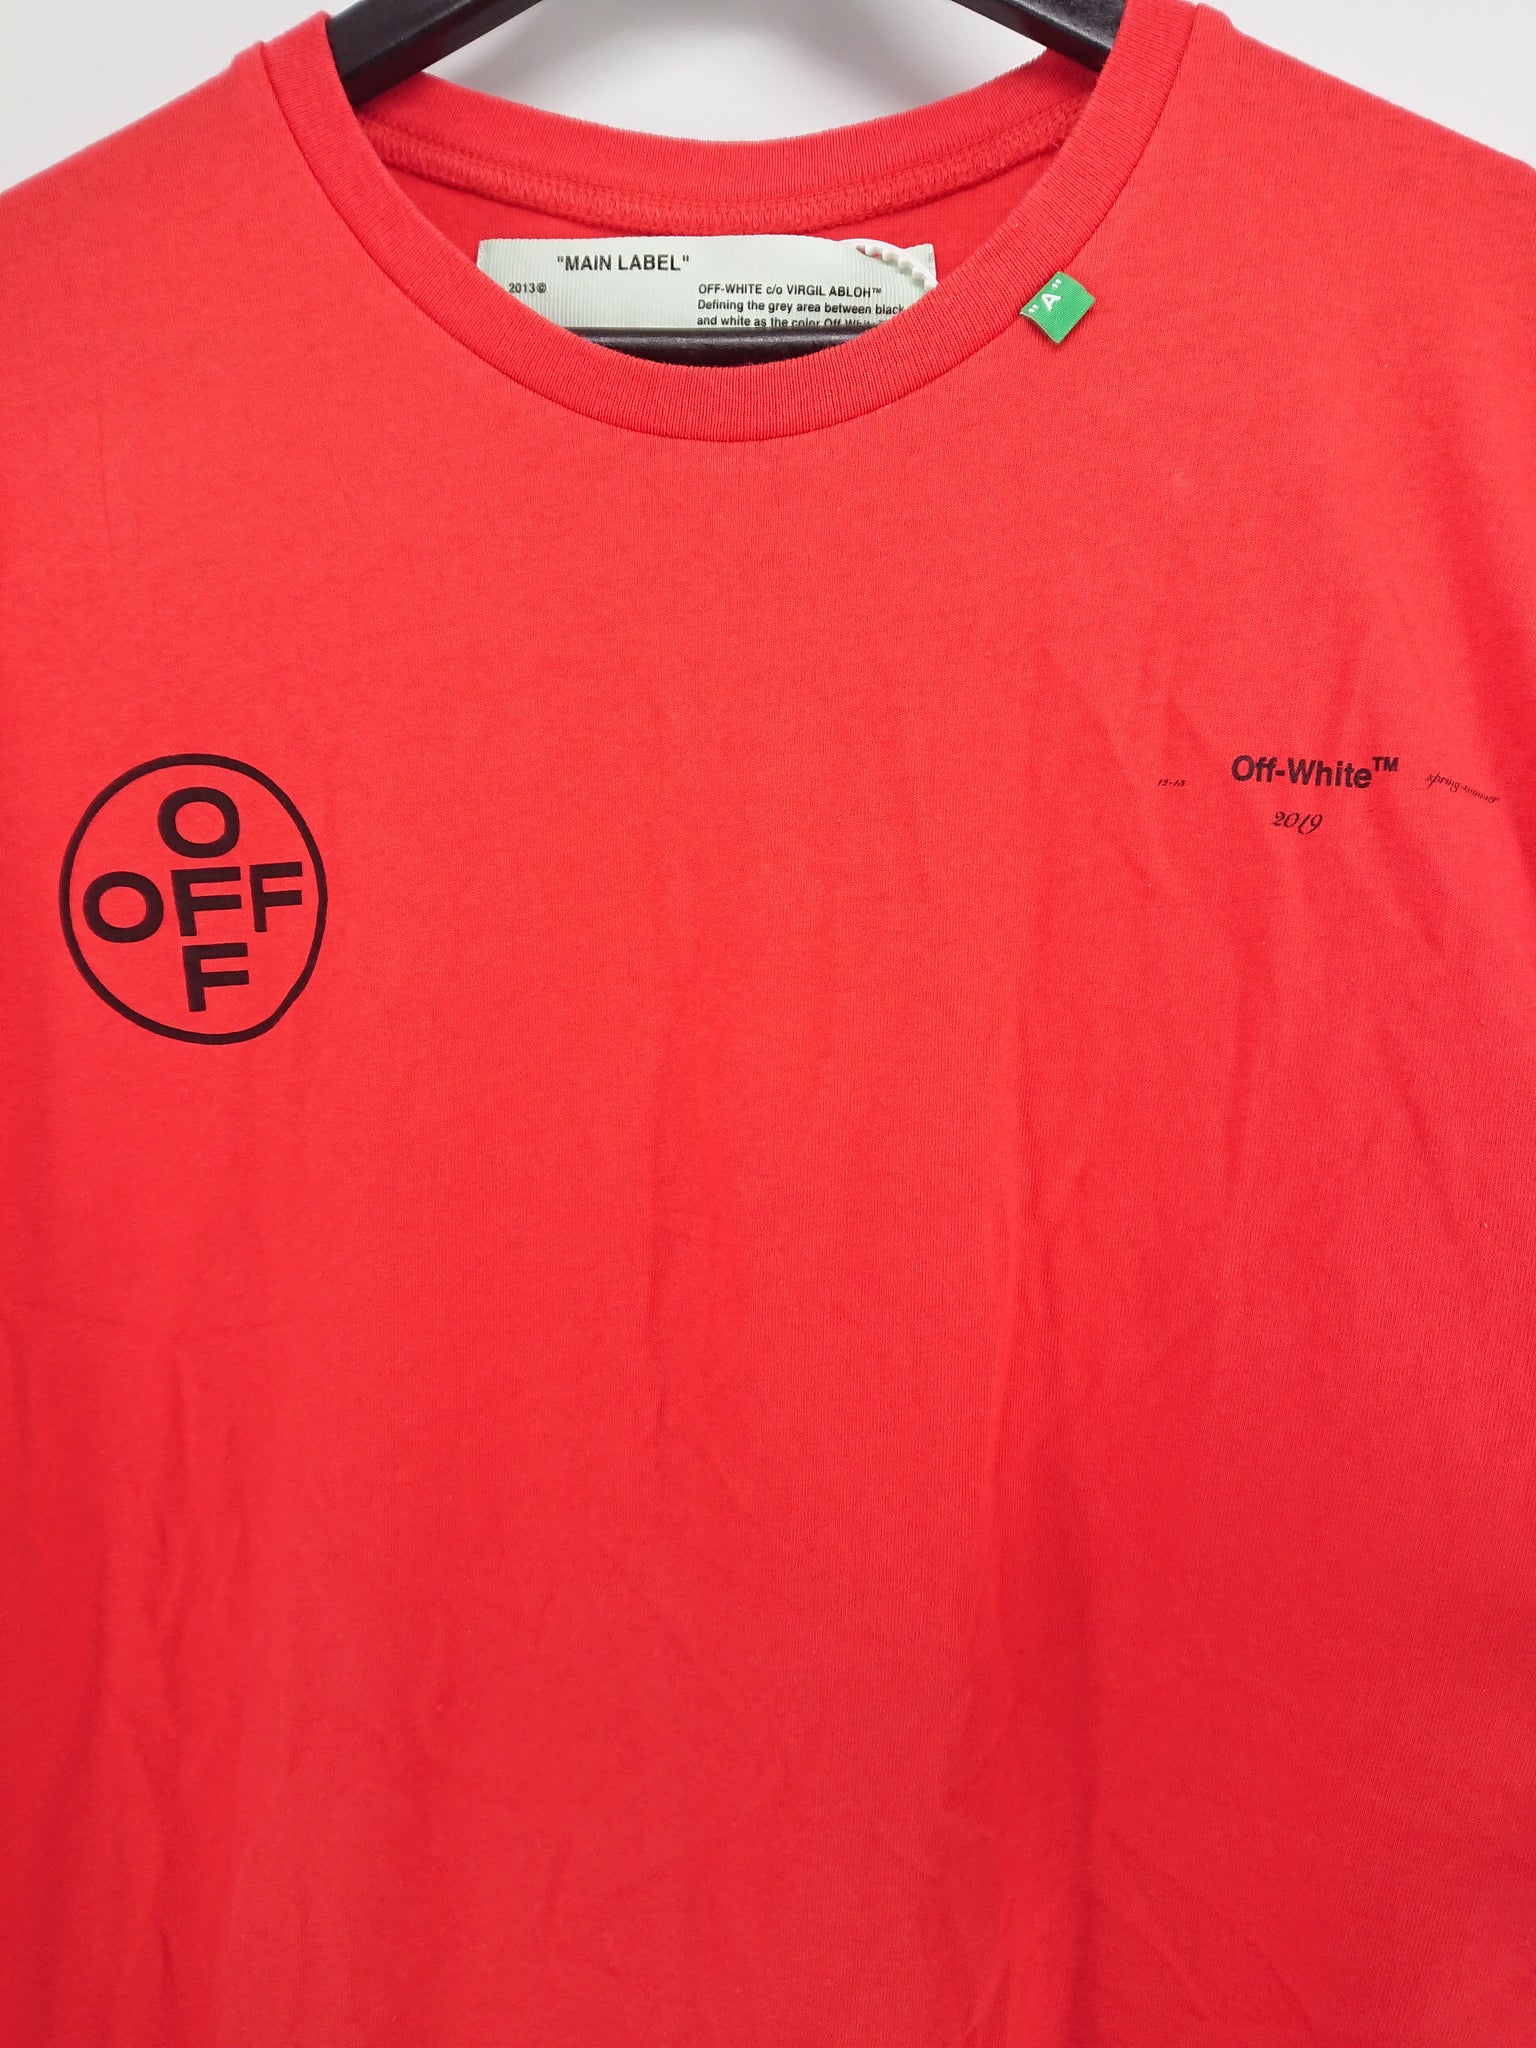 red off white tee